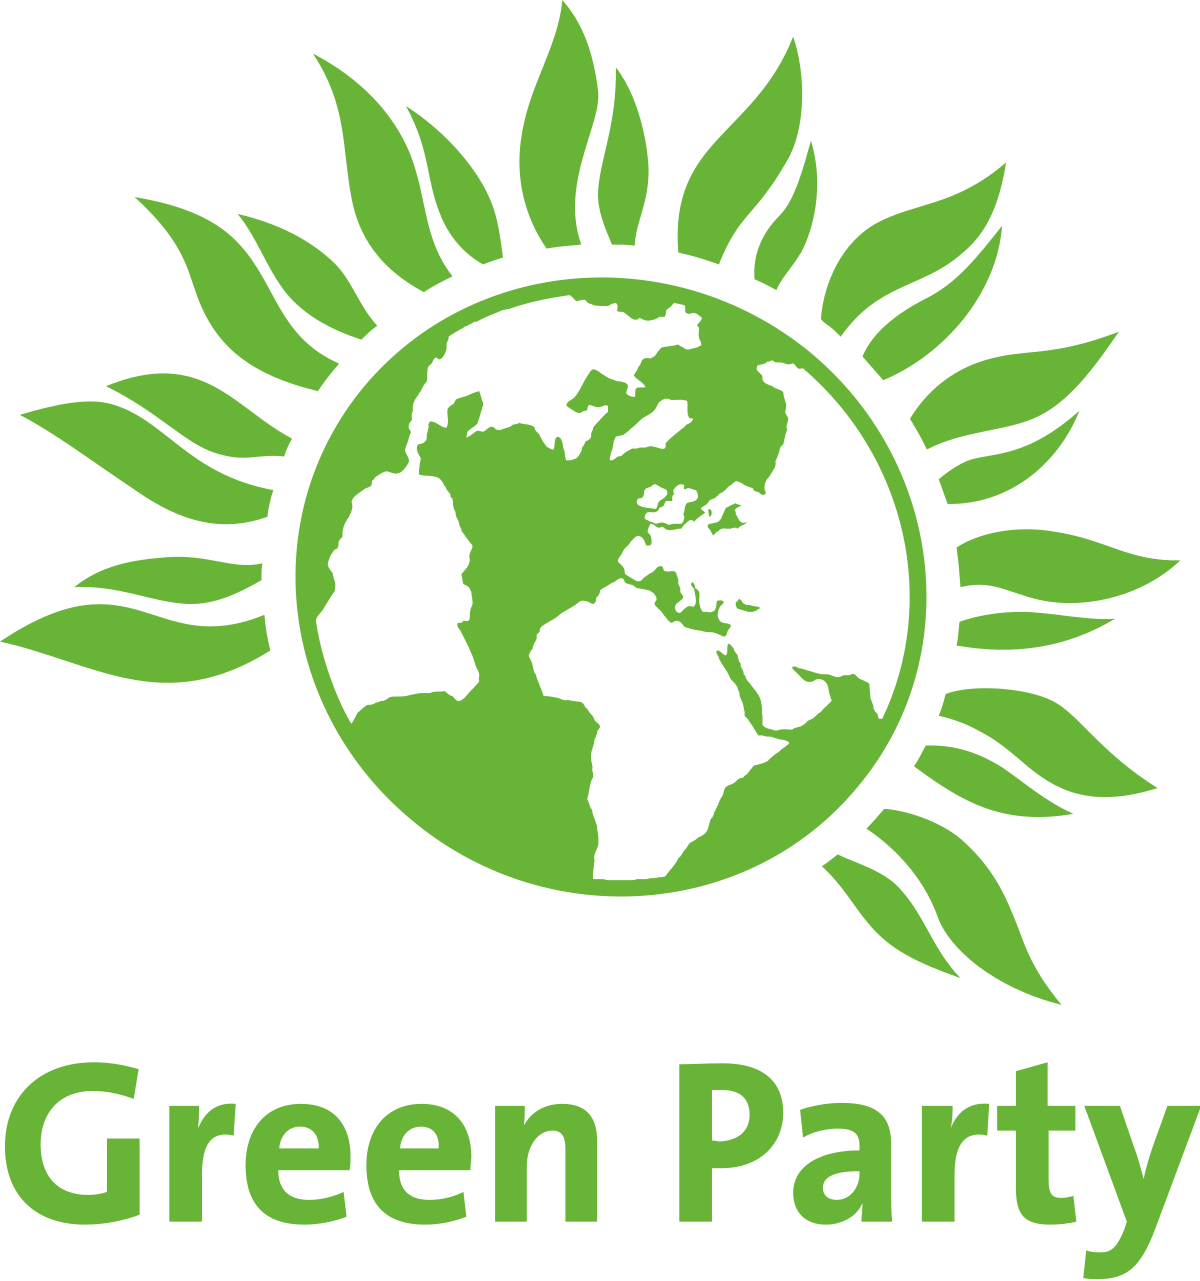 Old Blue and Green Eco-Activities Logo - Green Party of England and Wales